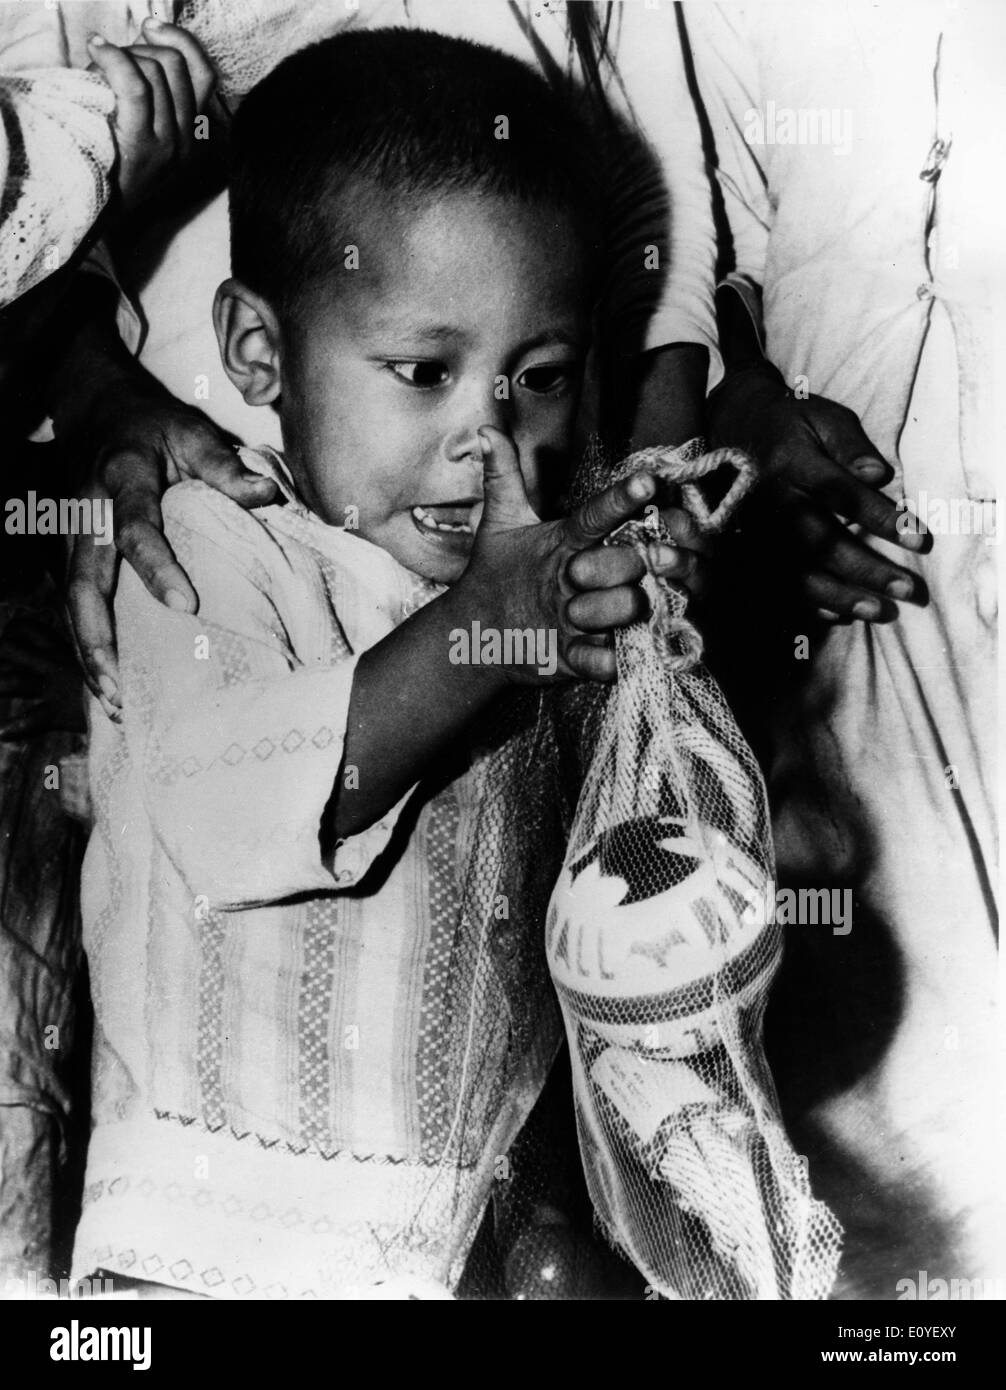 Jan. 01, 1970 - Phan Rang, Vietnam - A Vietnamese child inspects toys given by the 1st Brigade of the 101st Airborne Division to 400 children whose fathers serve in the Vietnamese forces. In the 1950's, the US began to send troops to Vietnam, during the following 25-year period, the ensuing war would create some of the strongest tensions in US history. Almost 3 million US men and women were sent to fight for what was a questionable cause. In total, it is estimated that over 2,5 million people on both sides were killed. Stock Photo